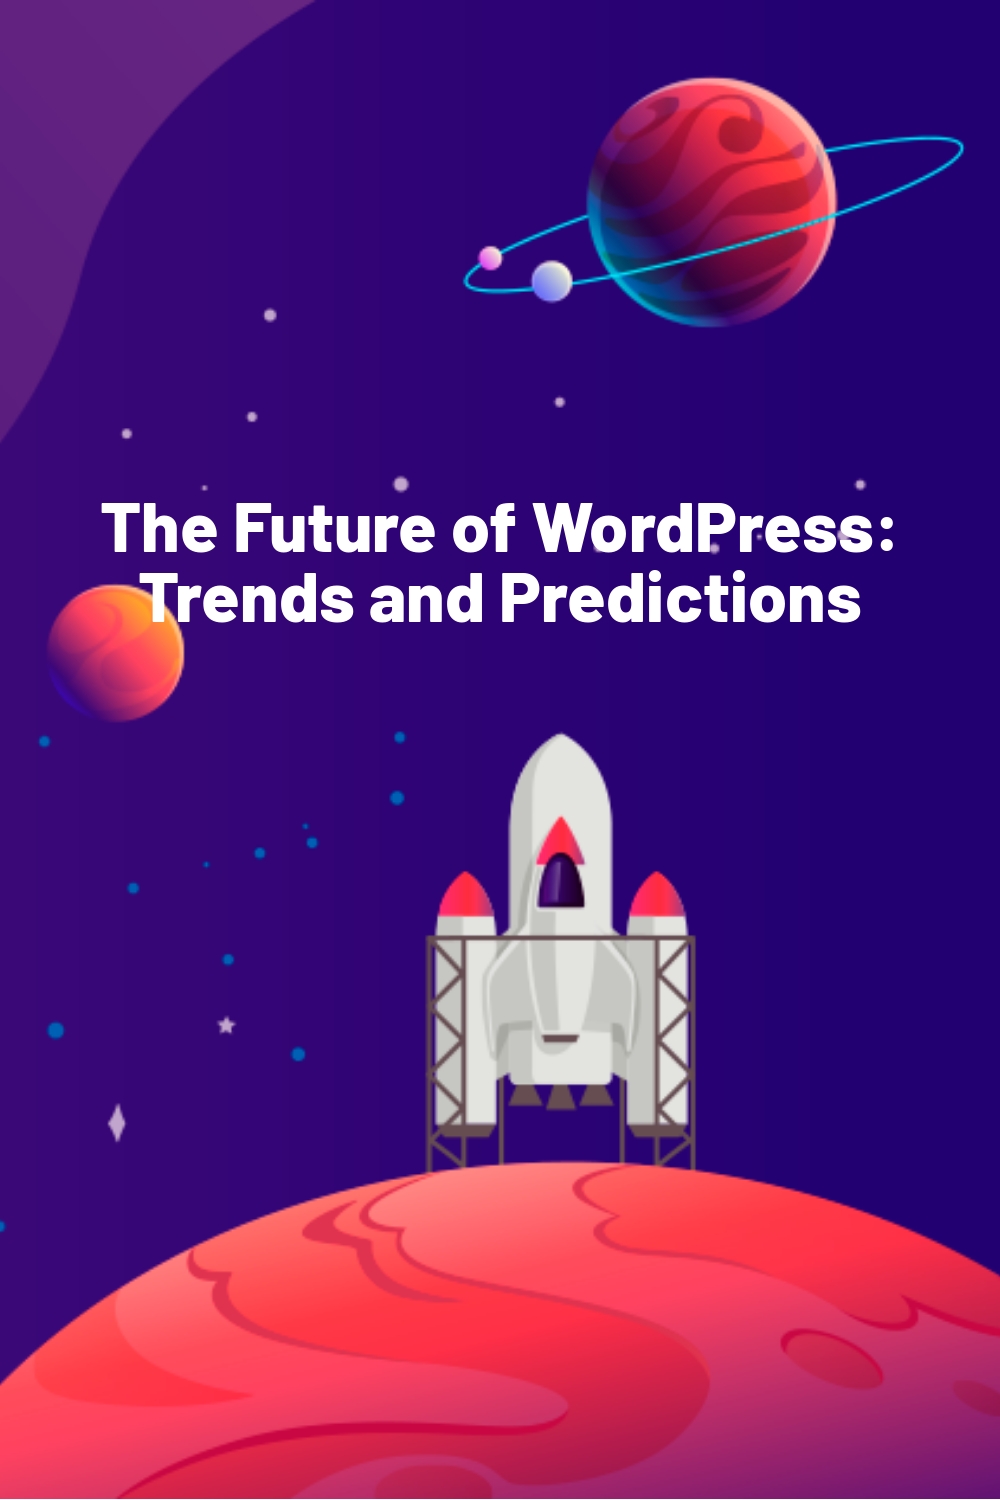 The Future of WordPress: Trends and Predictions